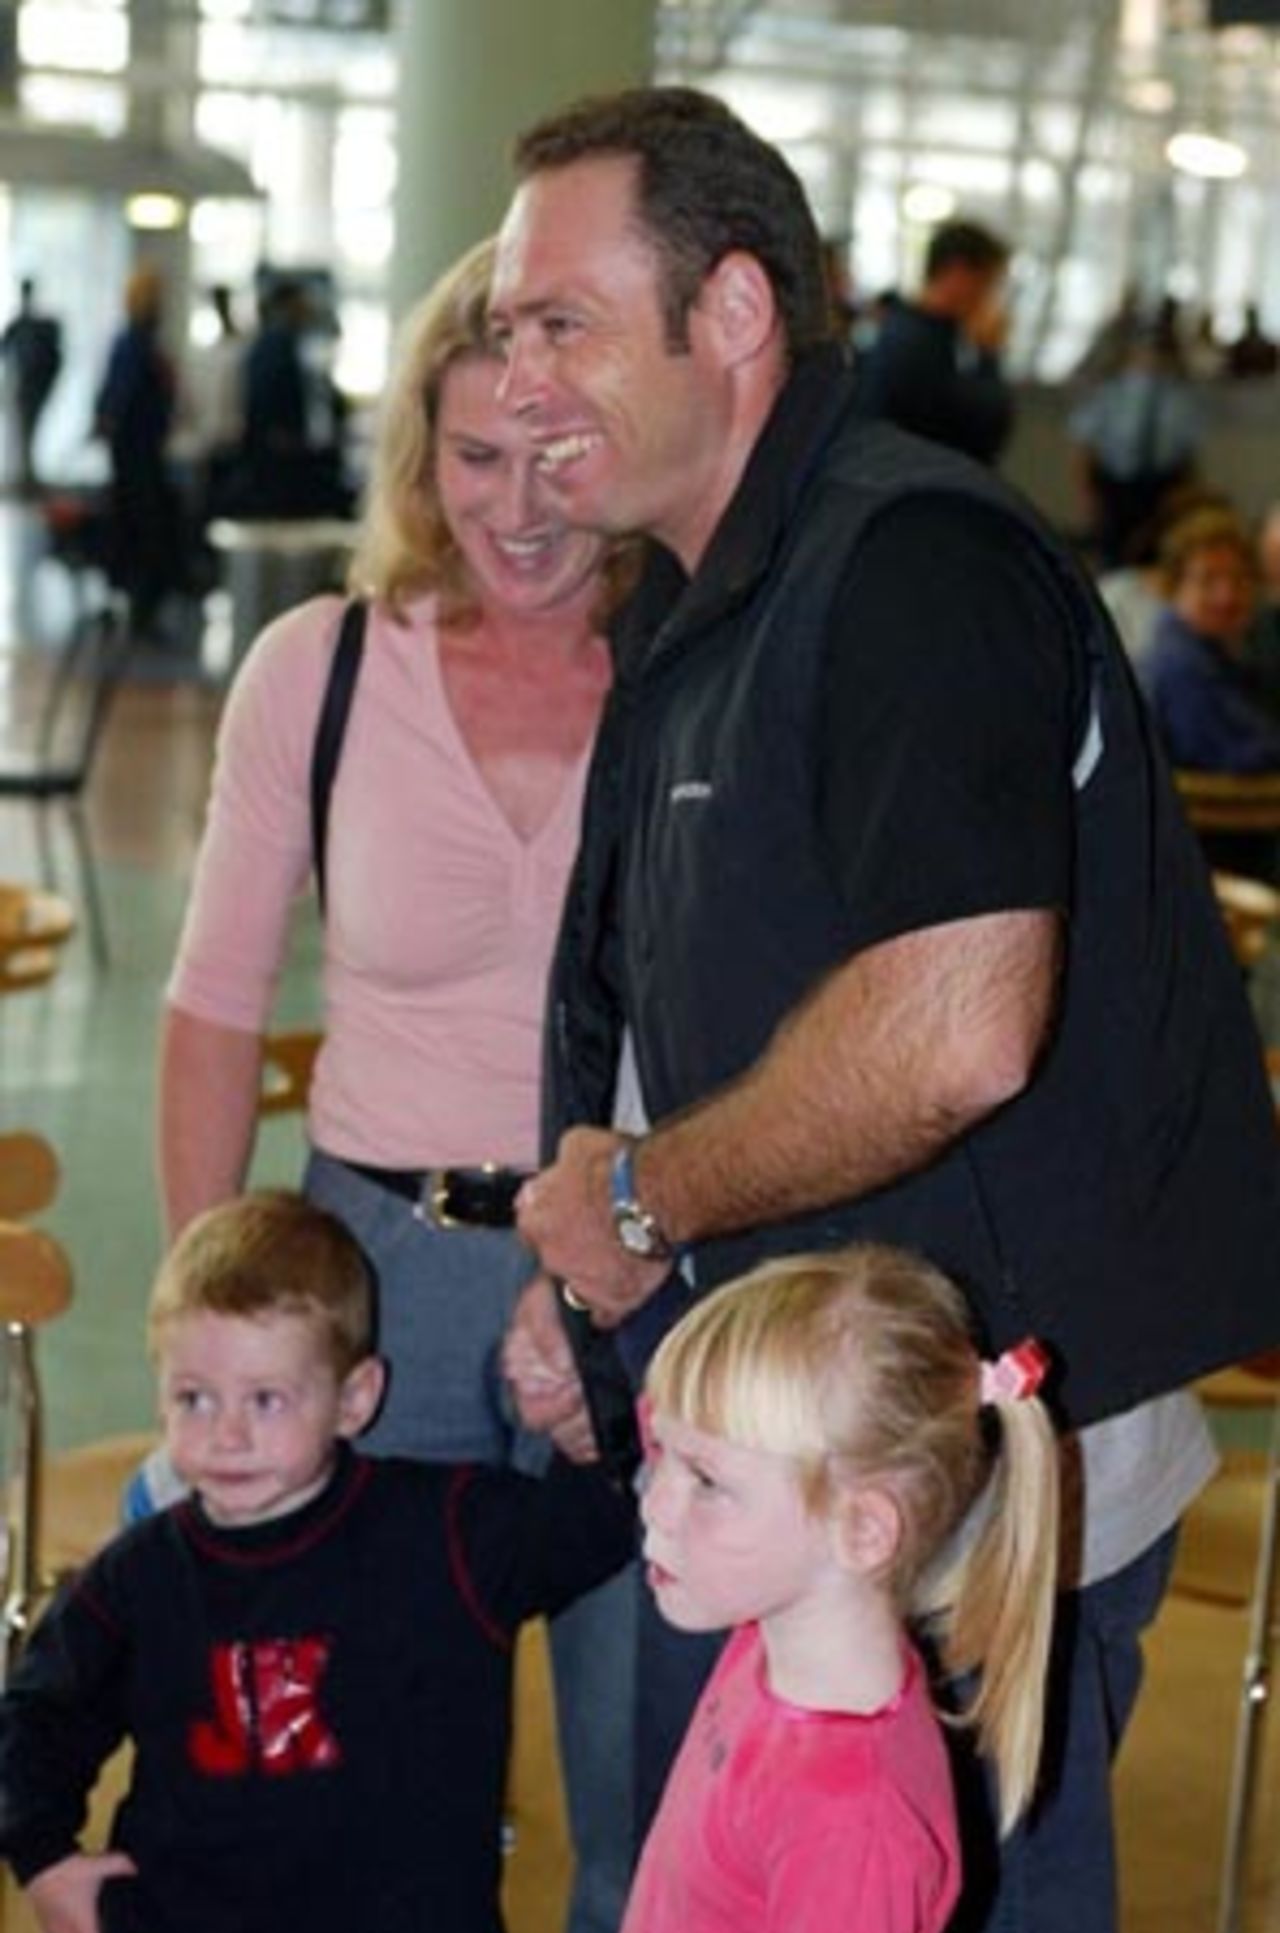 Radio and television commentator and former New Zealand player Danny Morrison meets his family after arriving at Auckland Airport. He returned home with the New Zealand team from Pakistan after a bomb blast outside their Karachi hotel caused the tour to be cancelled just prior to the second Test. 10 May 2002.